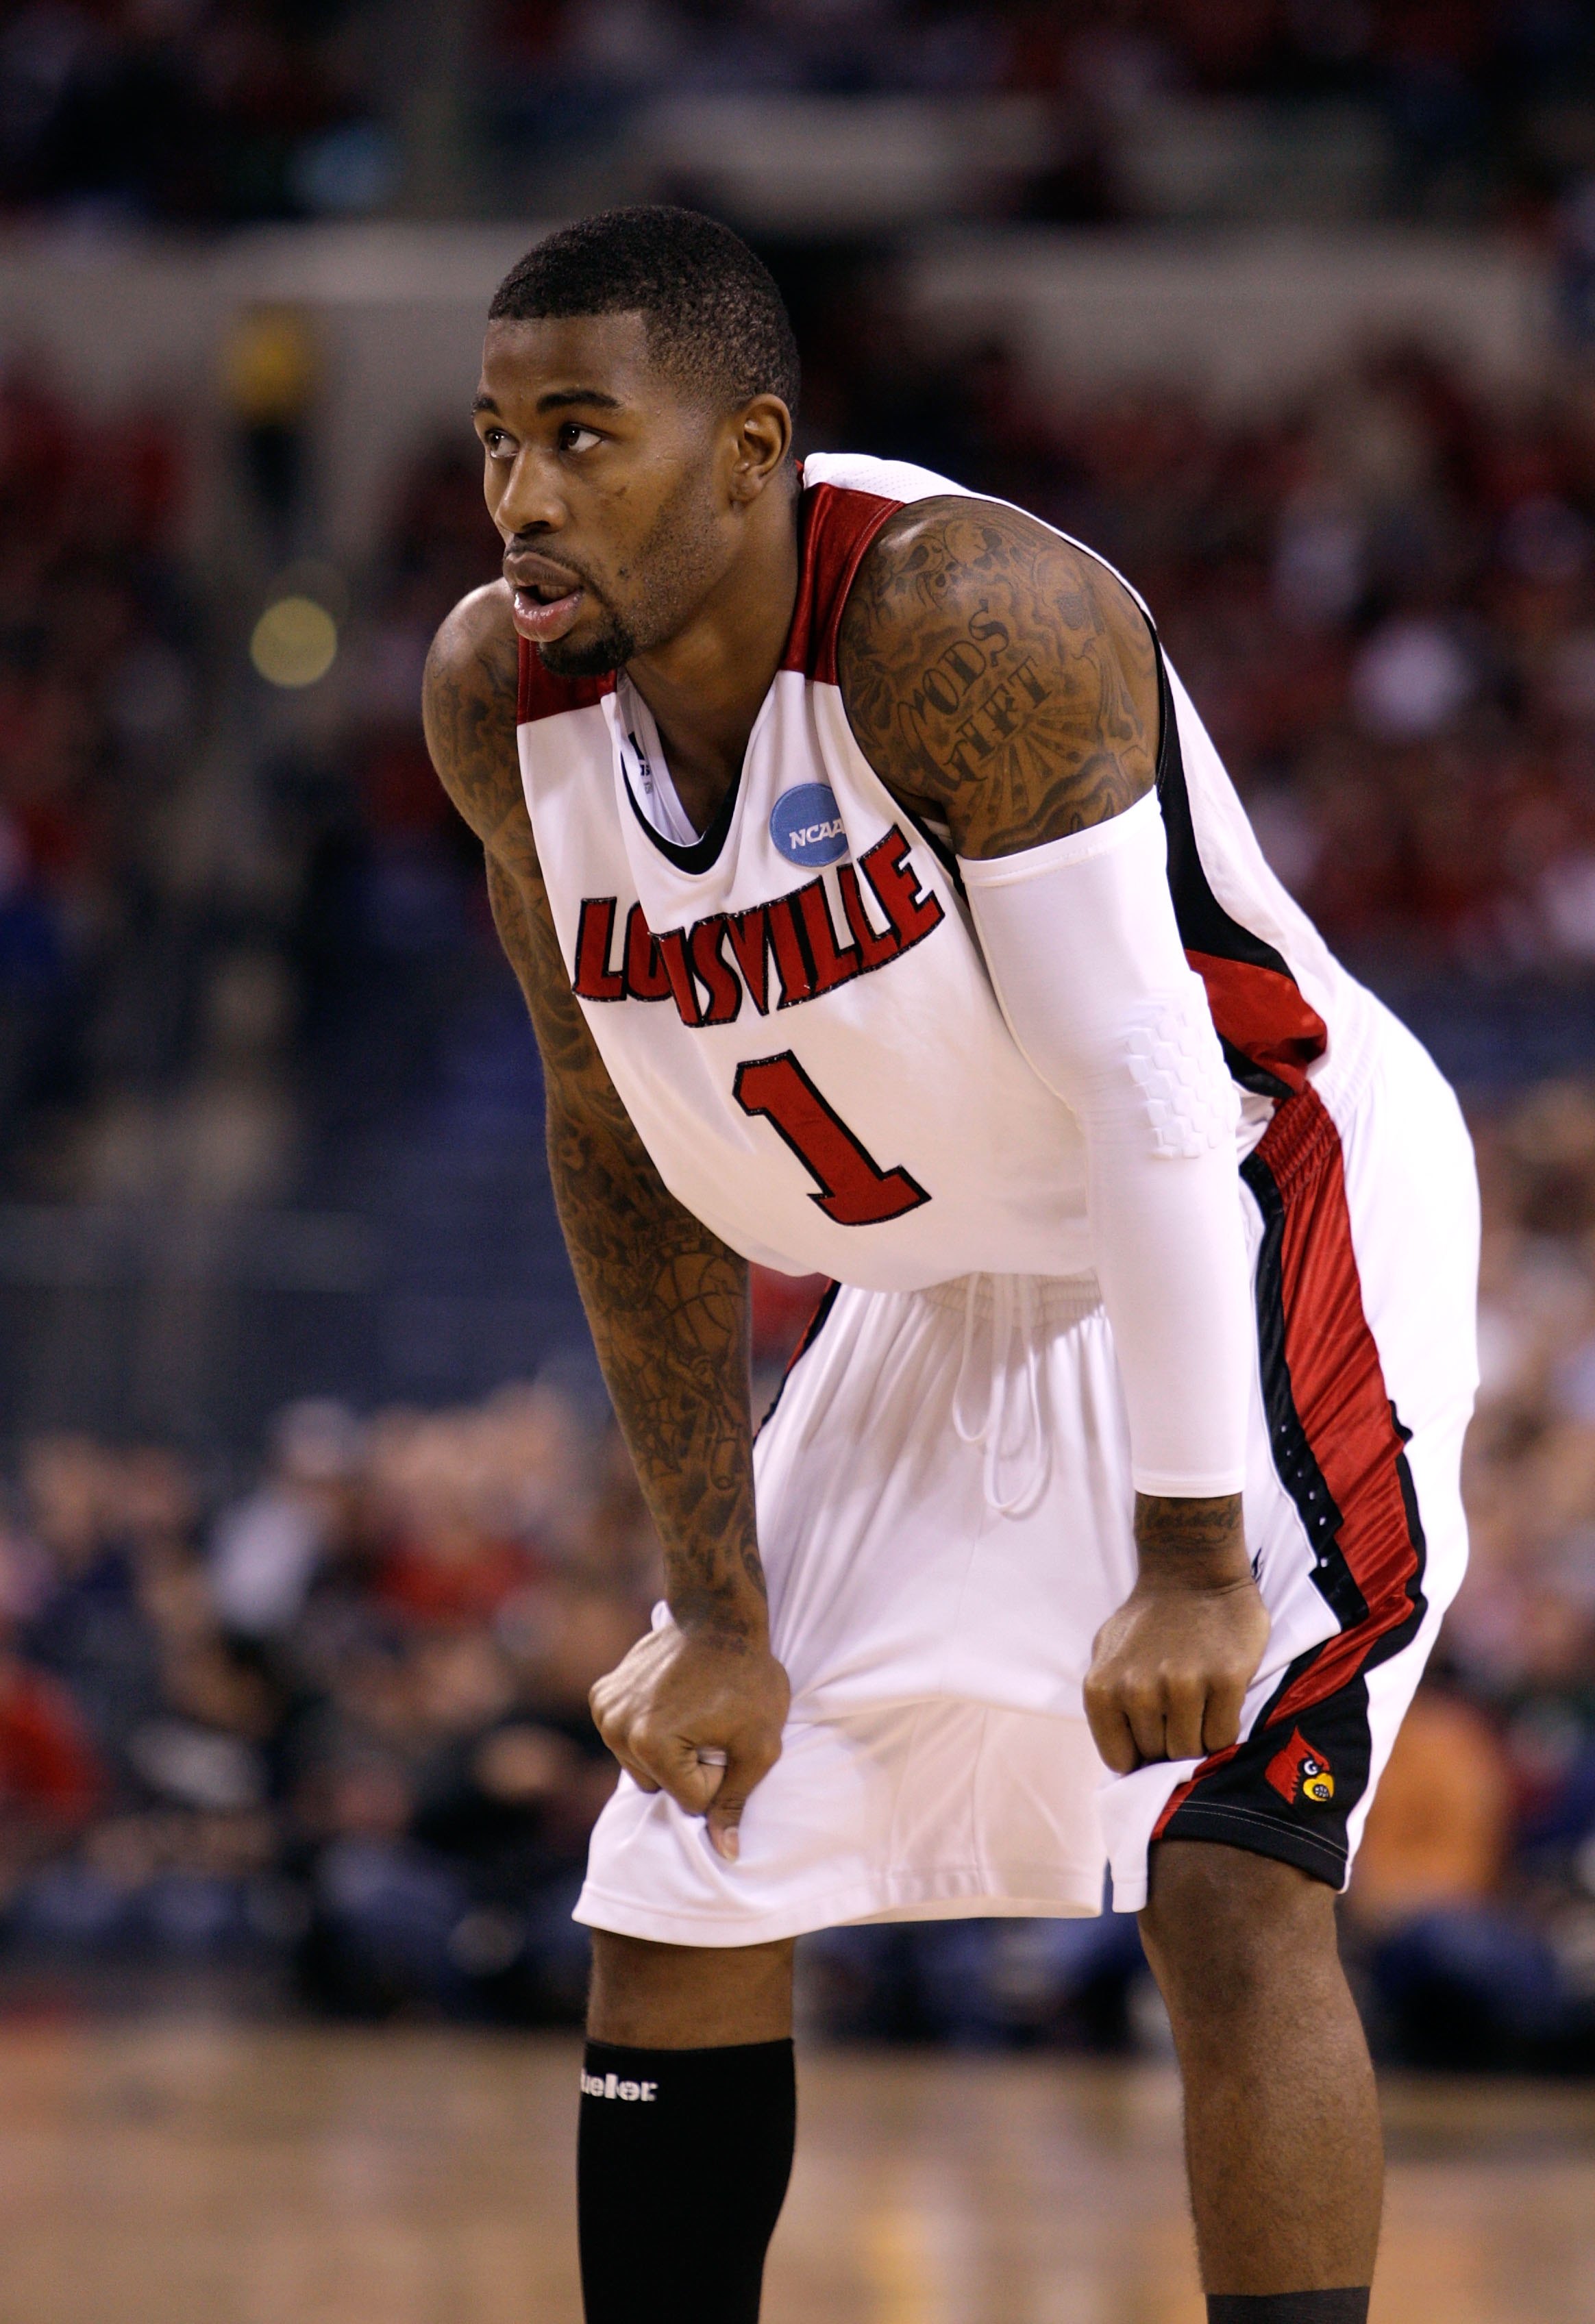 INDIANAPOLIS - MARCH 29:  Terrence Williams #1 of the Louisville Cardinals looks on against the Michigan State Spartans during the fourth round of the NCAA Division I Men's Basketball Tournament at the Lucas Oil Stadium on March 29, 2009 in Indianapolis,